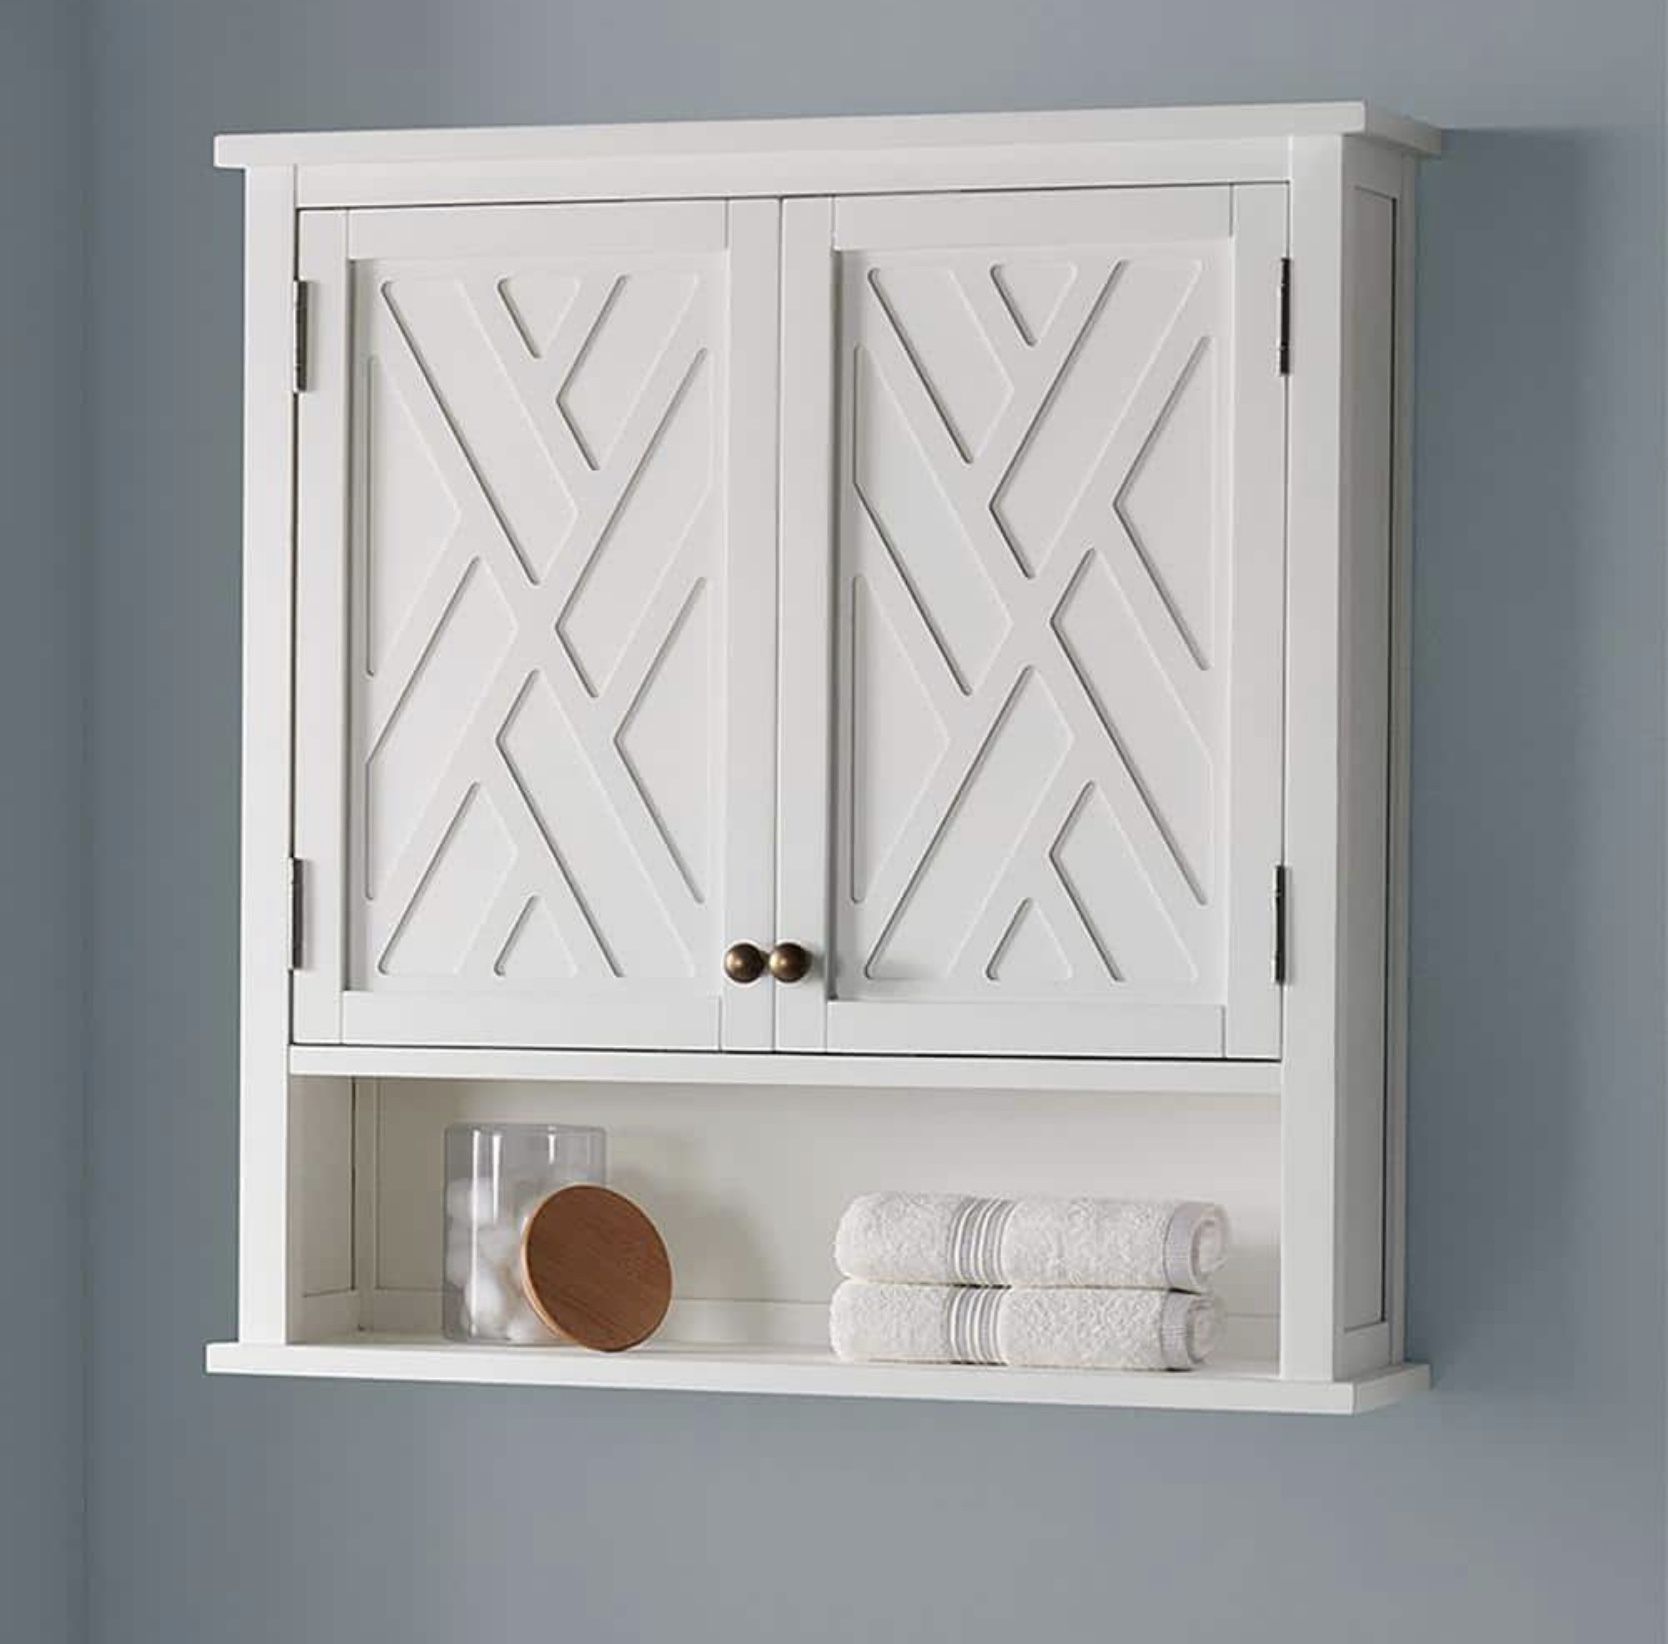 Alaterre Furniture Coventry 27 in. W Wall Cabinet with Two Doors and Open Shelf in White $115